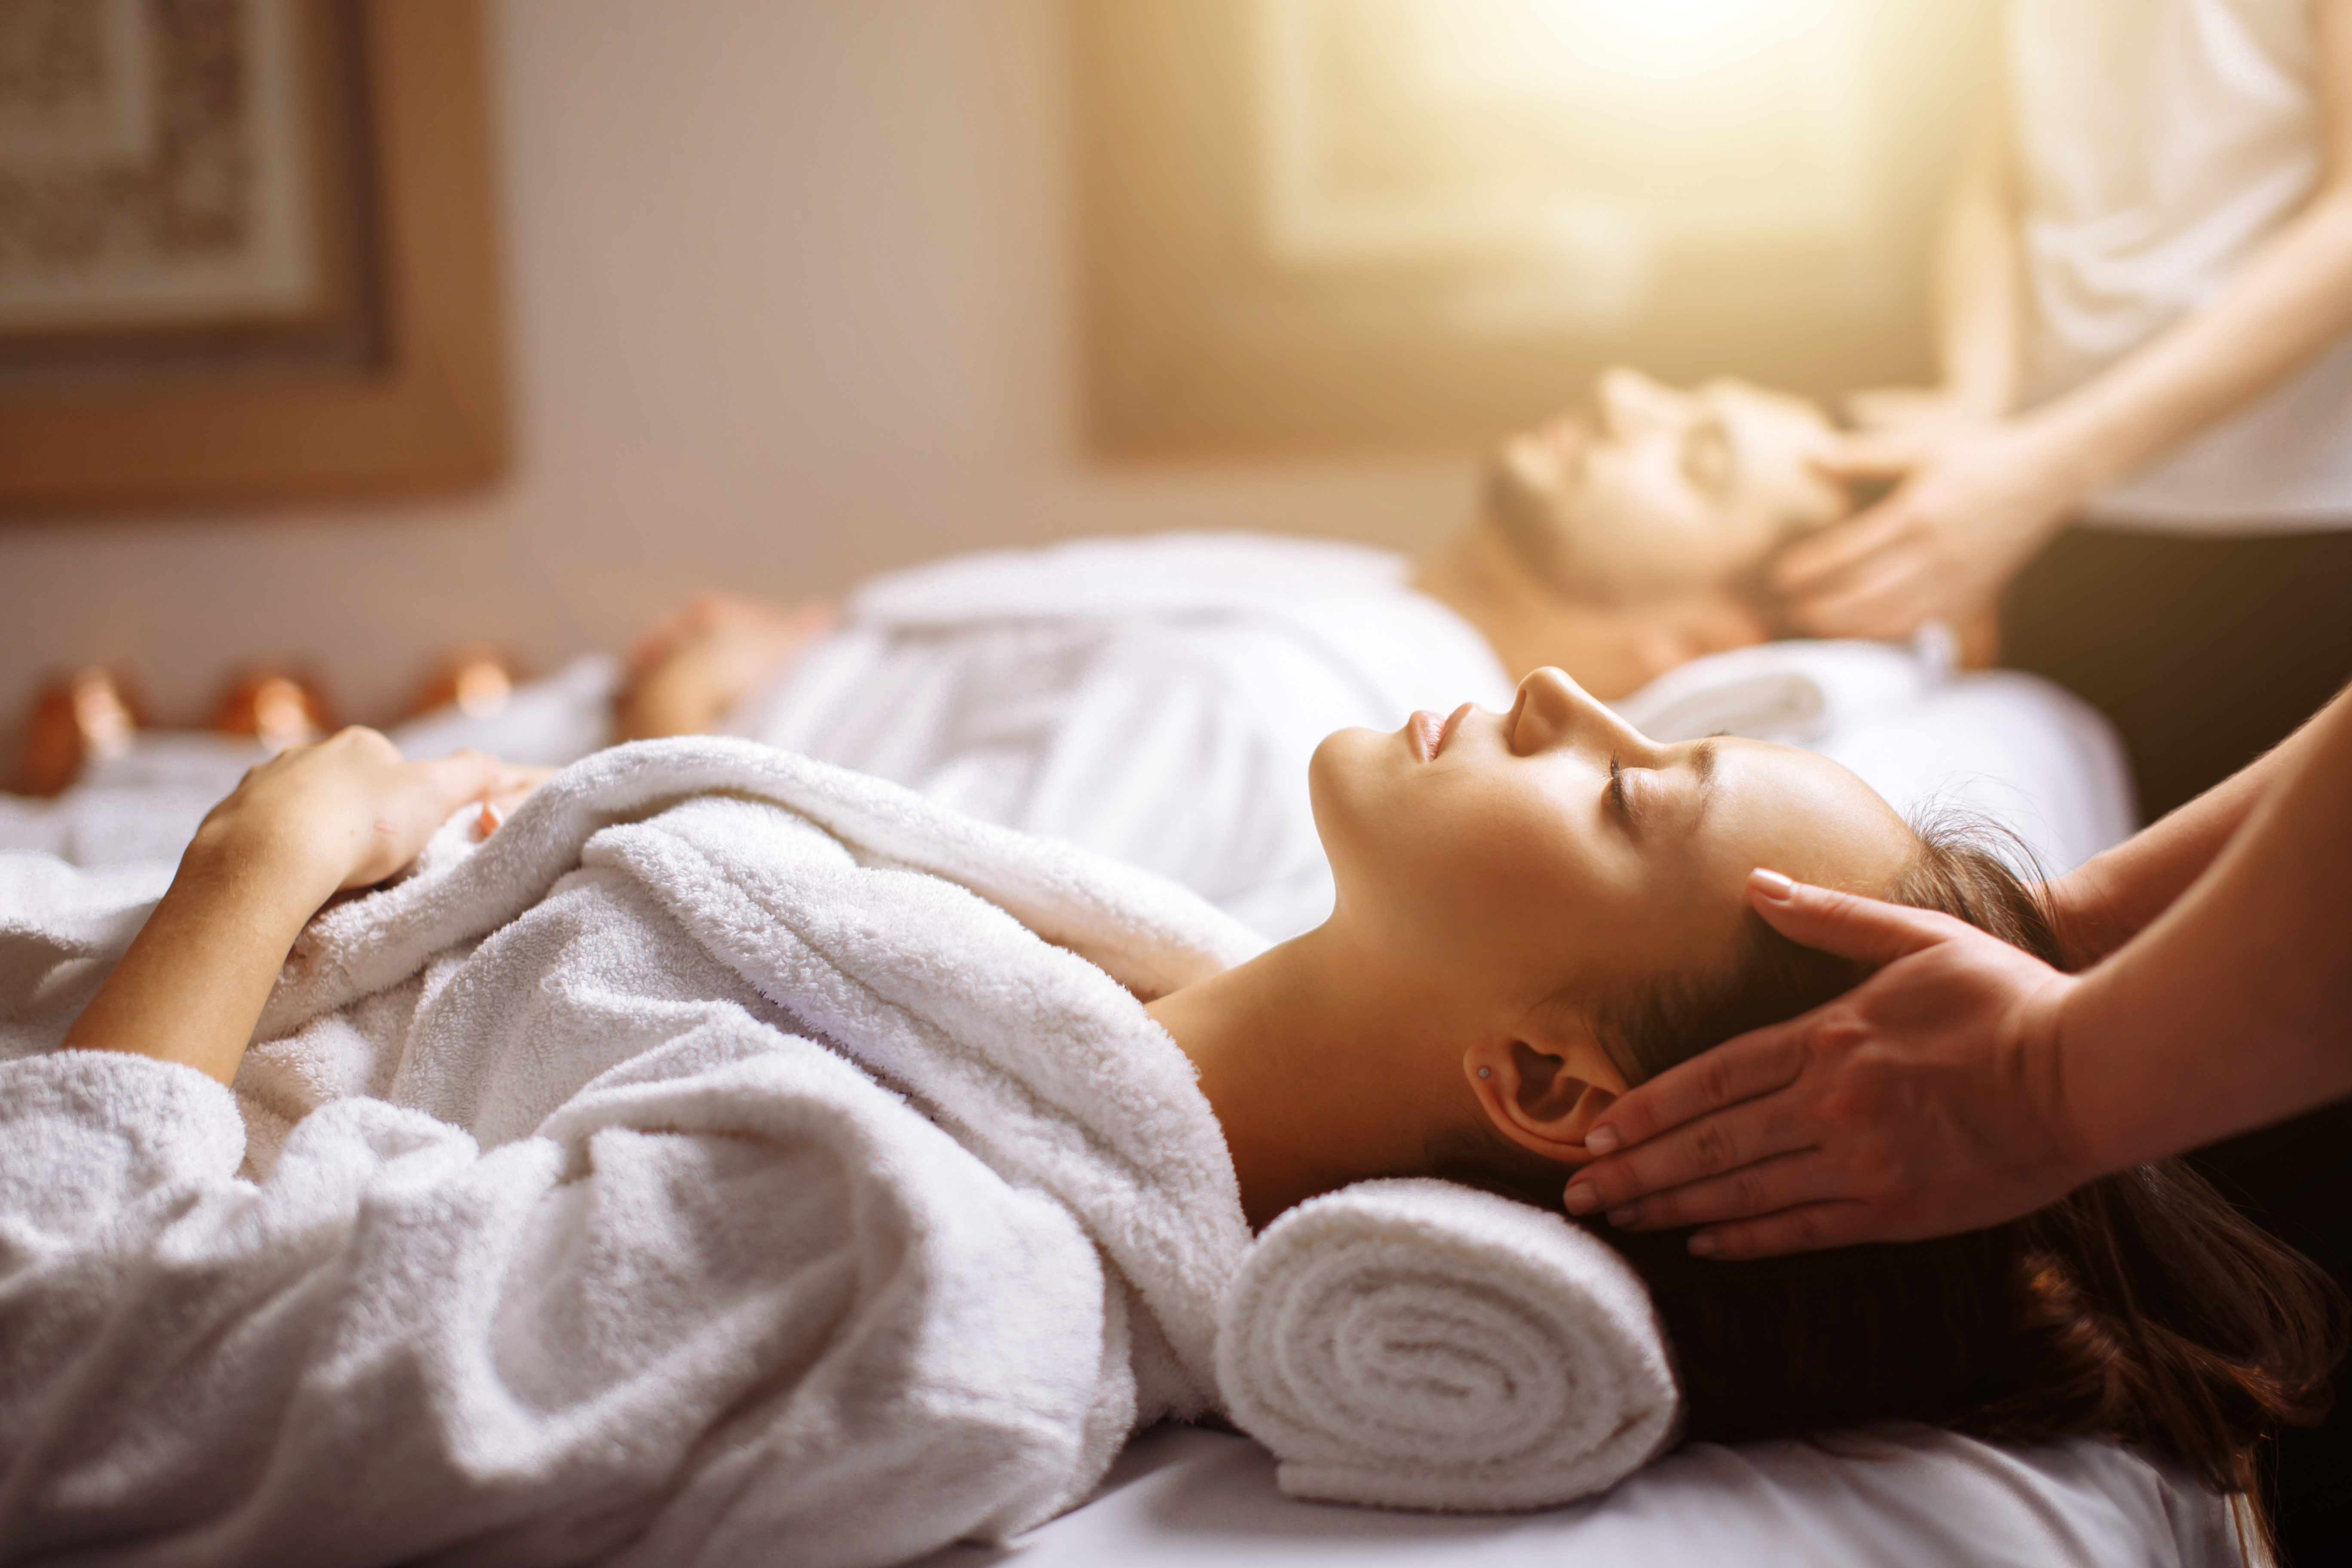 What Are the Wellness Benefits of Spa Treatments?